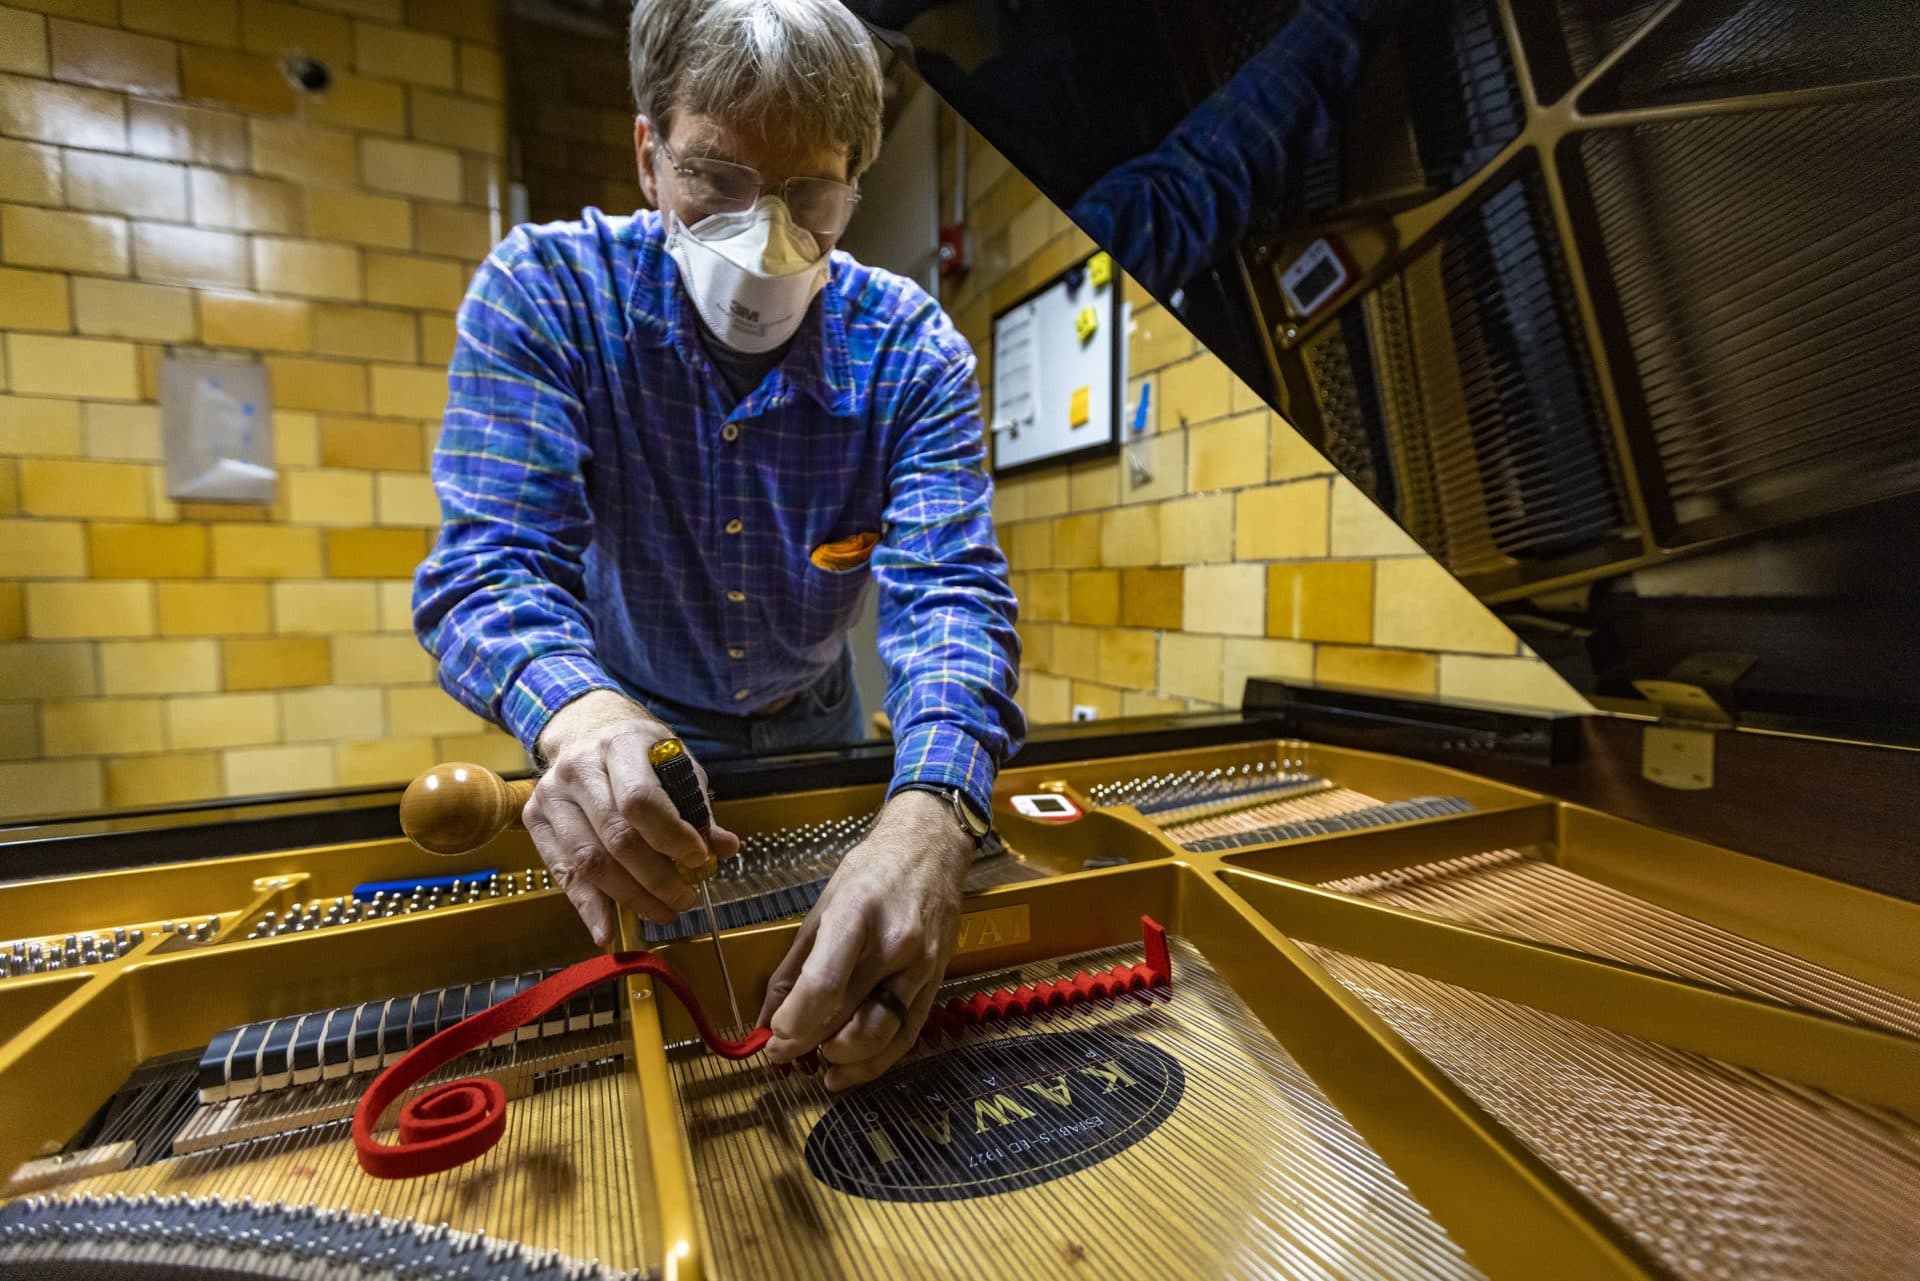 Michael Carlin places piano tuning felt between the strings of an instrument used for training in the Piano Technology program at North Bennet Street School. Carlin wants to become a piano tuner after a long career as an immigration attorney. (Jesse Costa/WBUR)